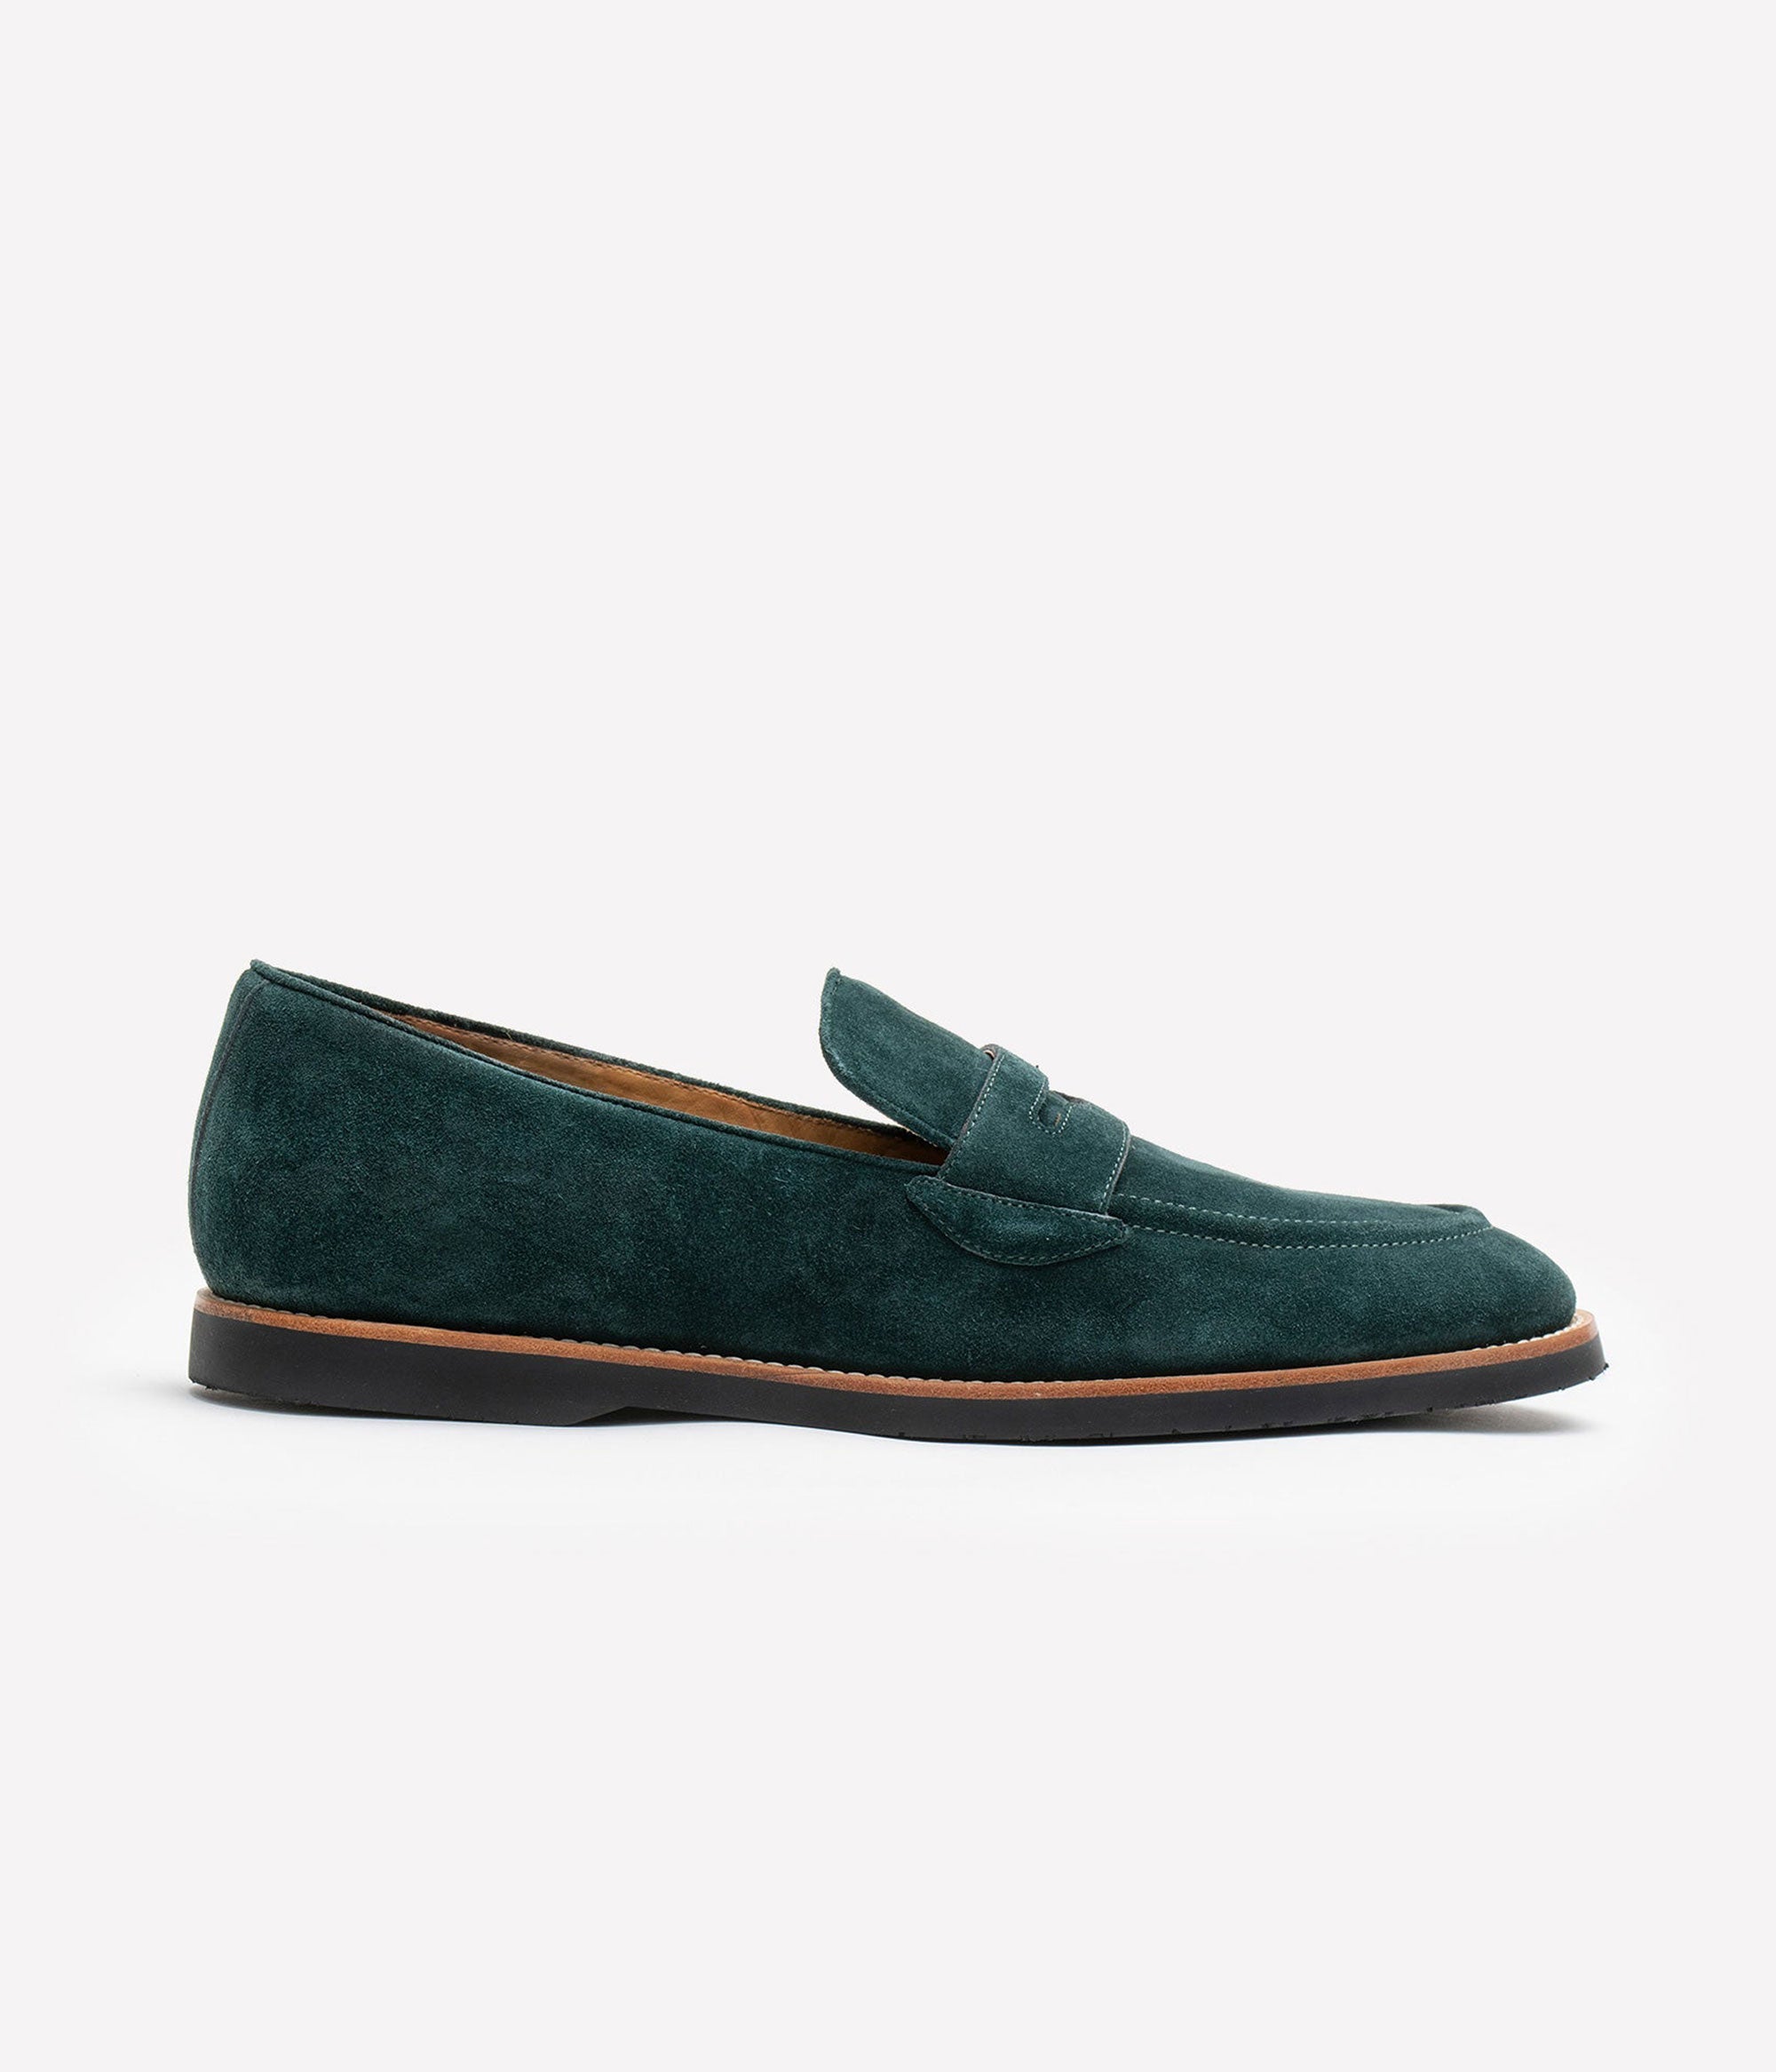 HUMAN RECREATIONAL SERVICES DEL REY PENNY LOAFER IN XKE GREEN AND ITALIAN SUEDE